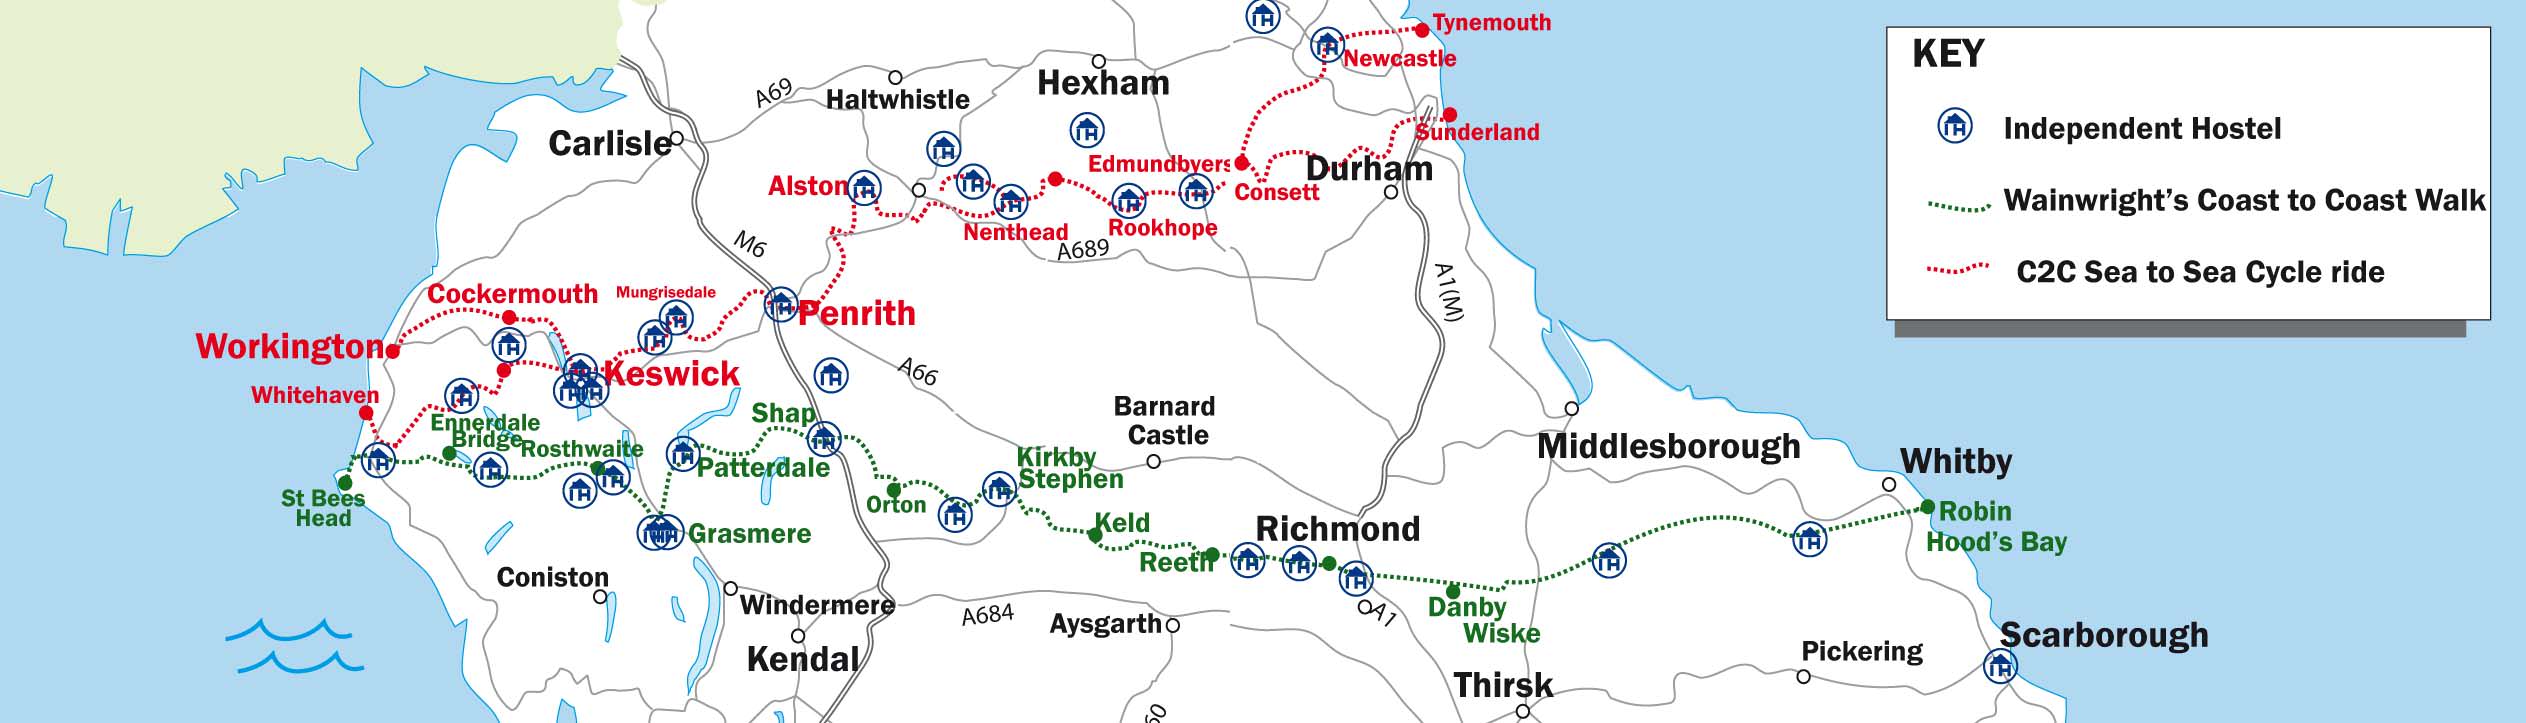 Map showing Coast to Coast cycle and walk routes and location of independent hostel and bunkhouse accommodation 